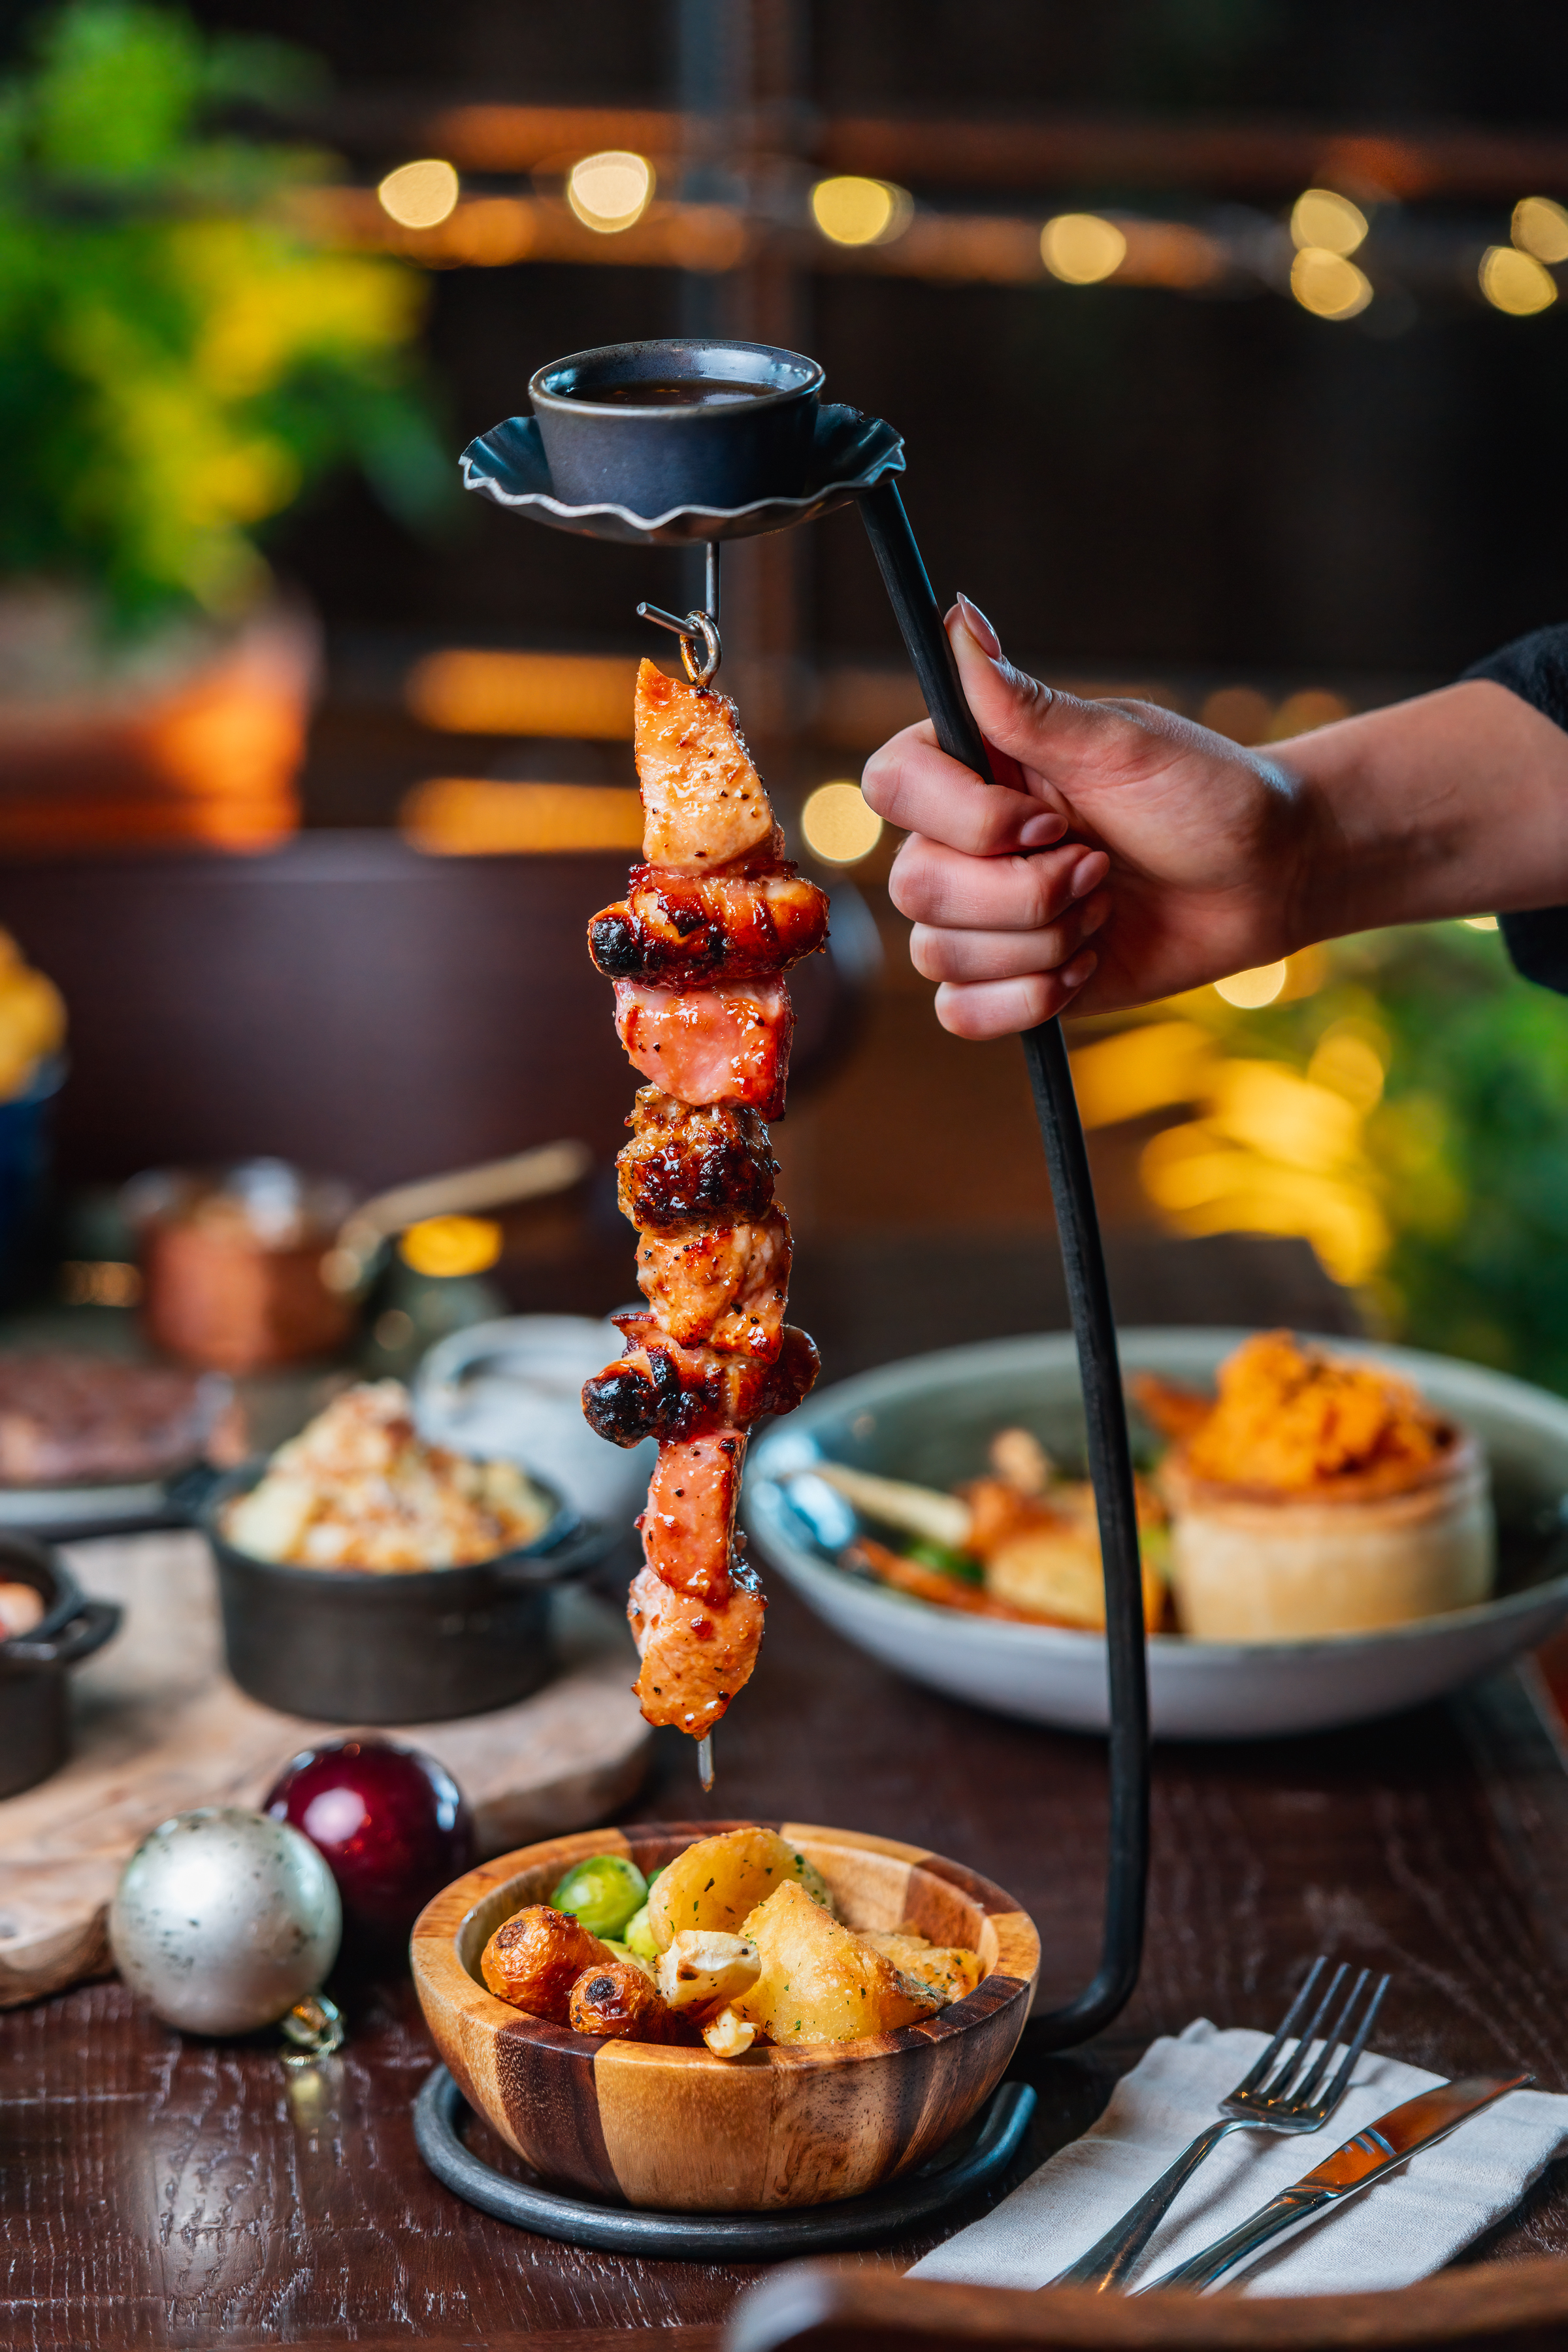 The hanging kebabs are a must-try